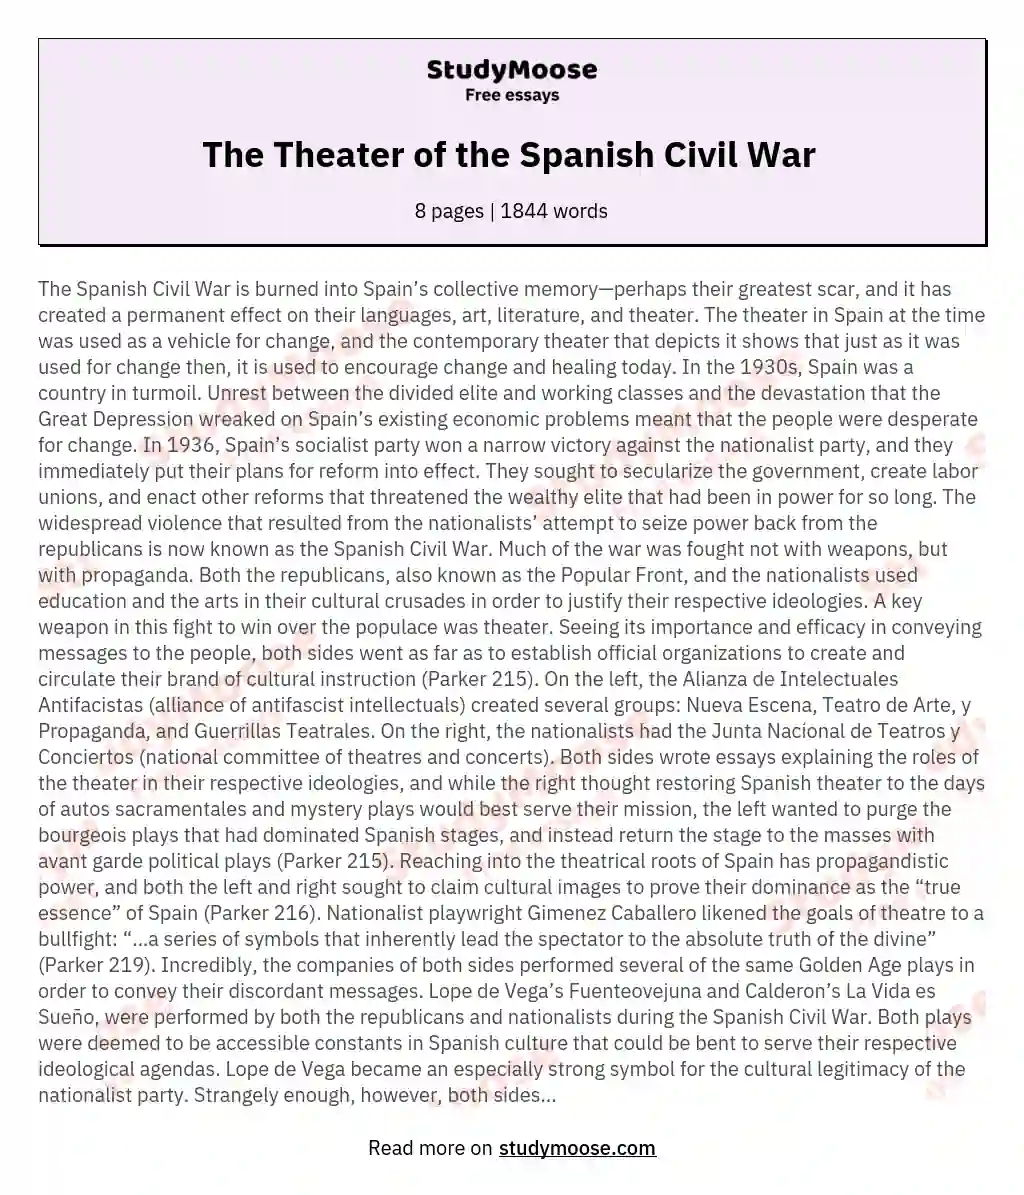 The Theater of the Spanish Civil War  essay